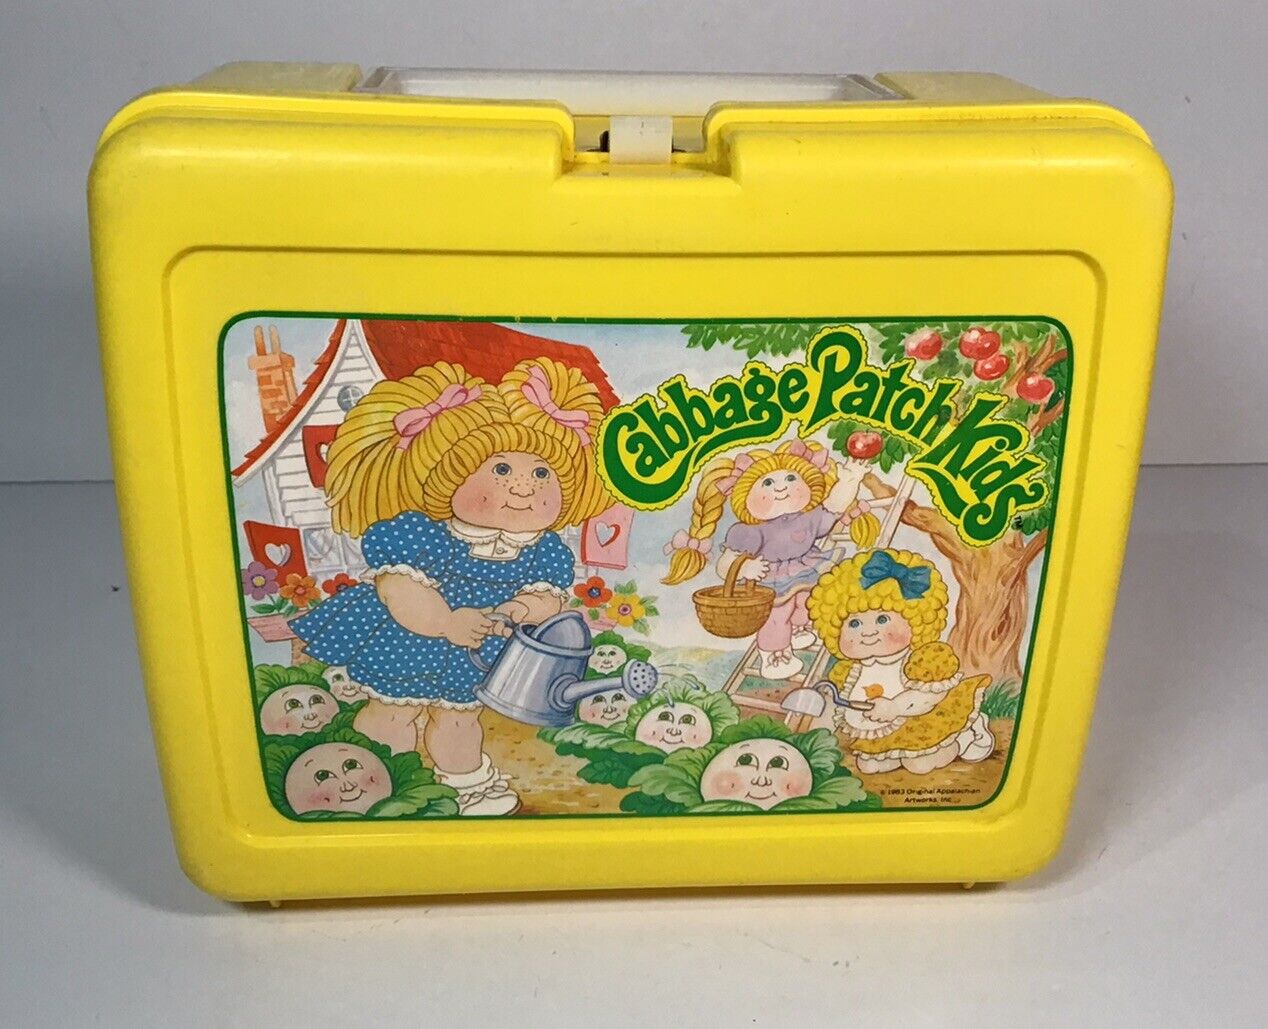 Vintage 1983 Cabbage Patch Kids Yellow Lunchbox